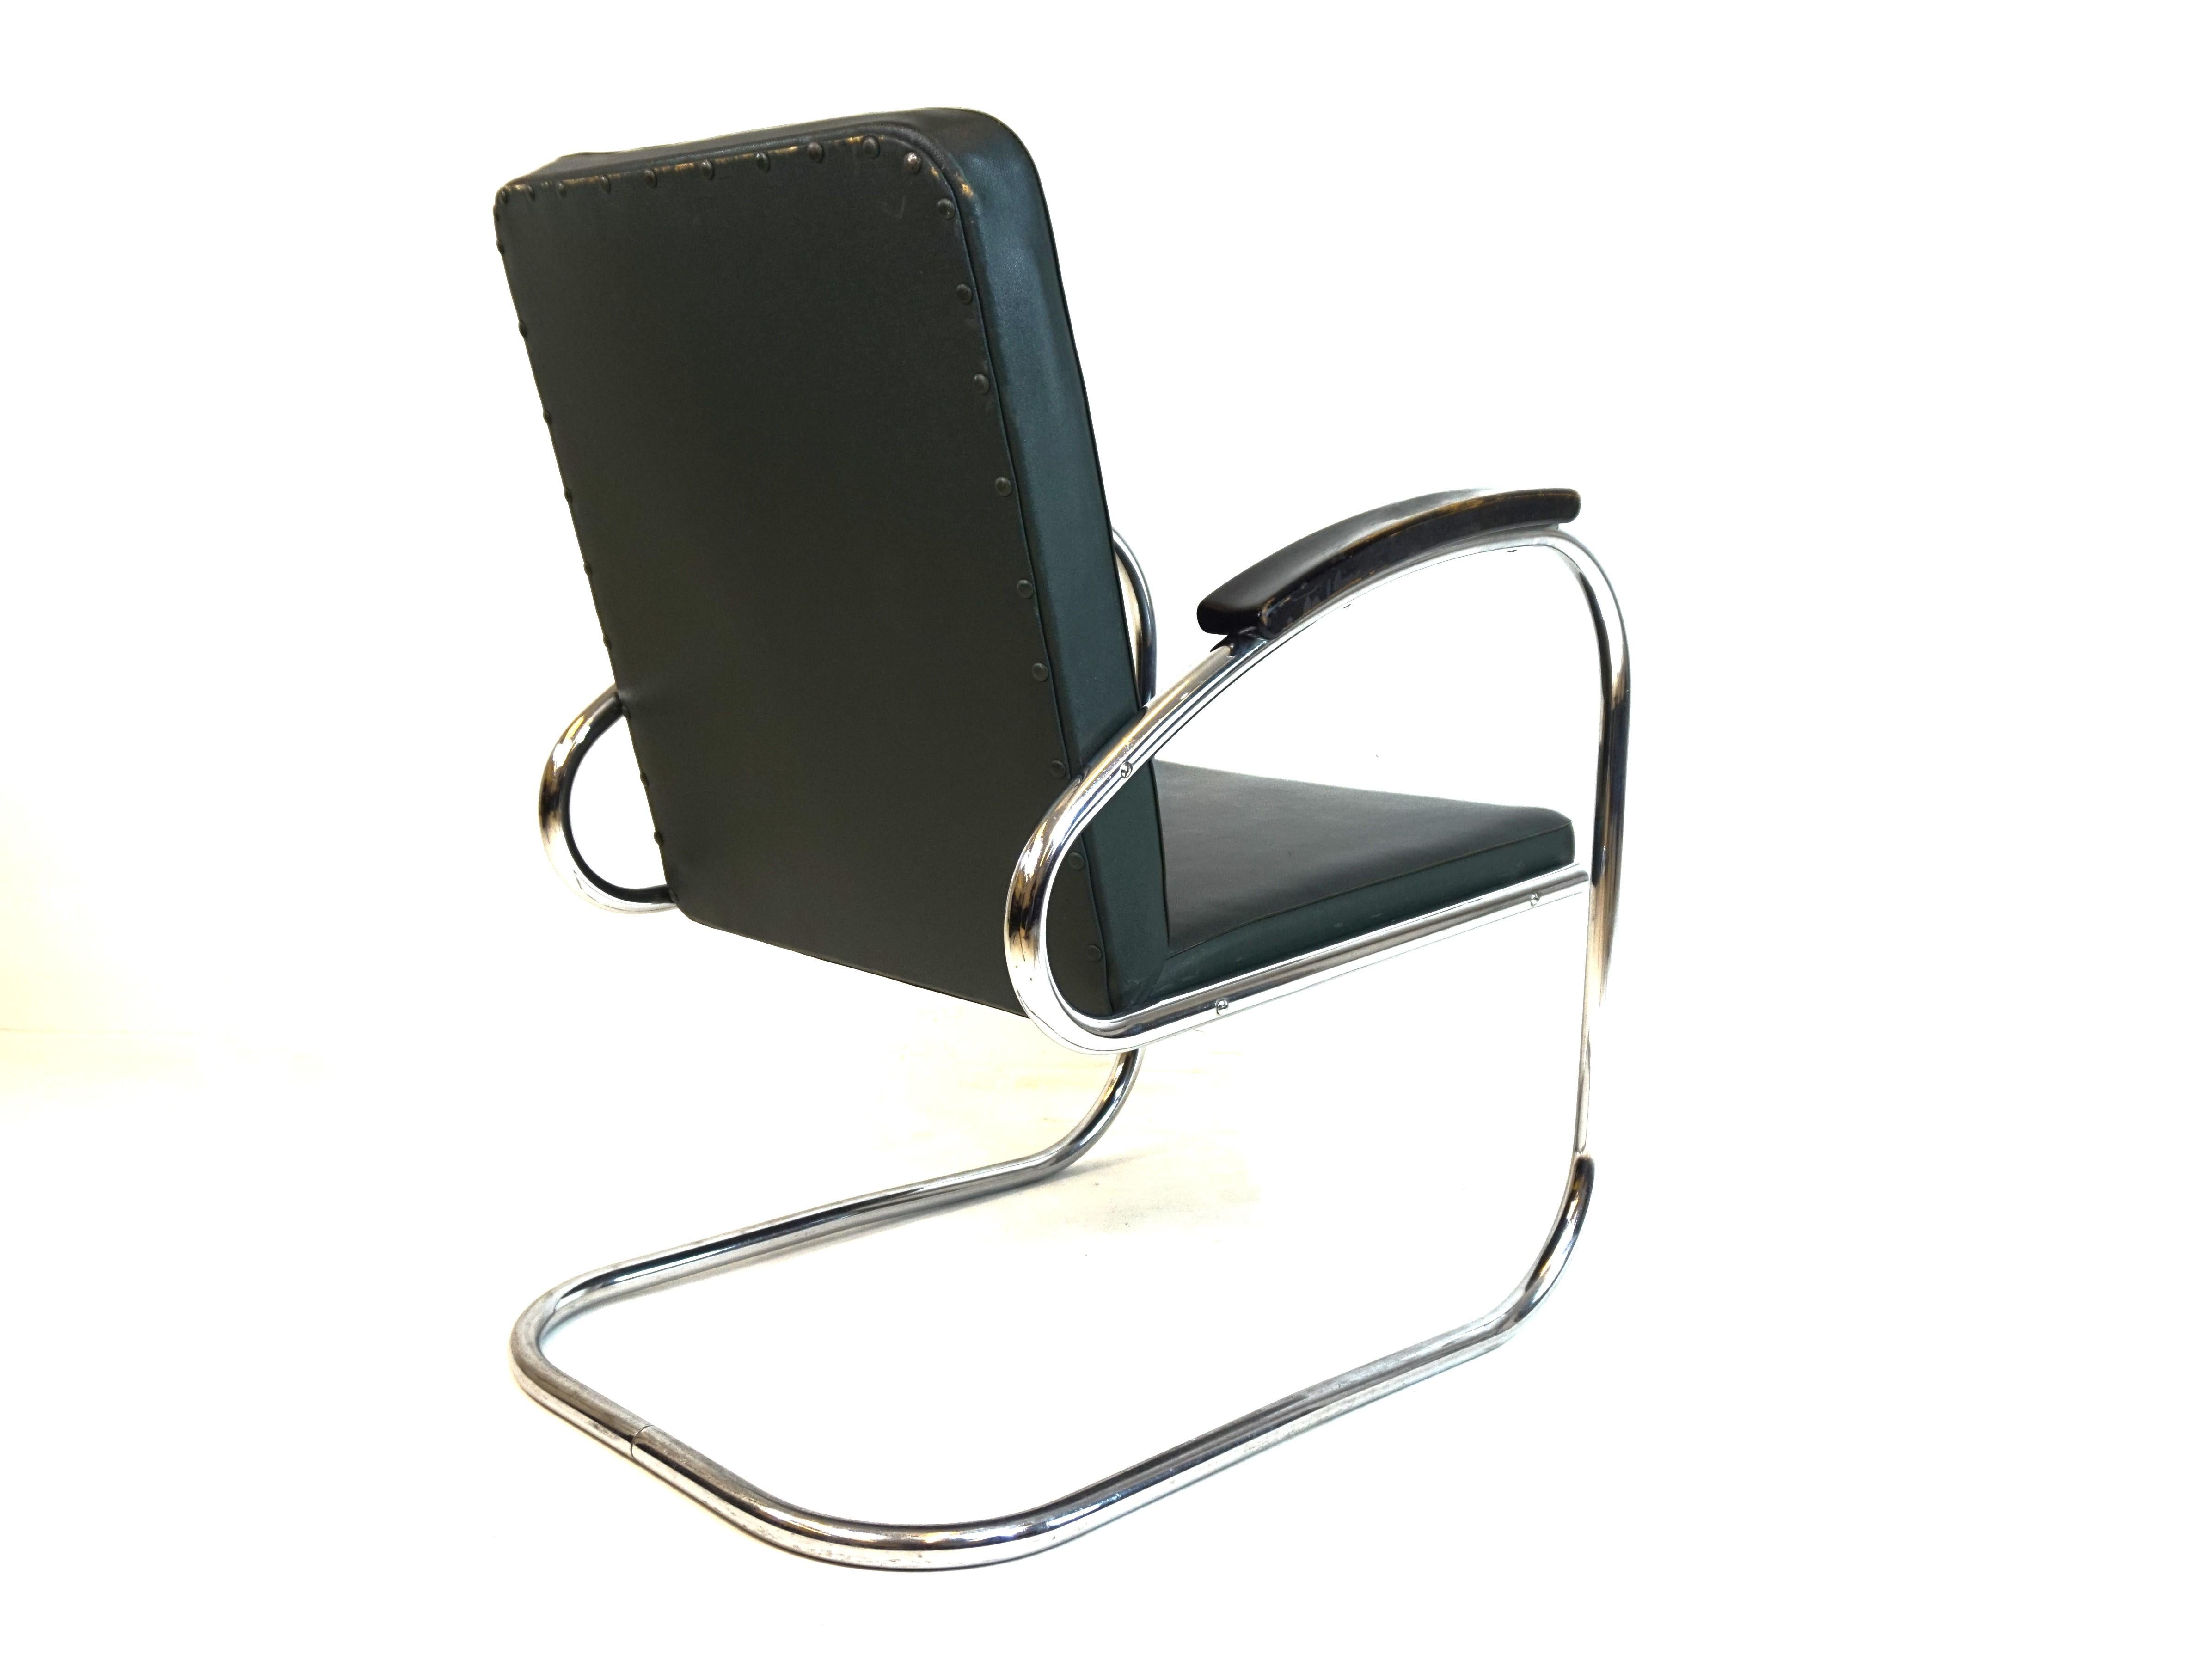 This RS7 lounge chair comes with the typical green faux leather cover of this time. The leather and the tubular steel frame are in perfect condition and only show slight signs of wear. The wooden armrests are painted black and have a very attractive